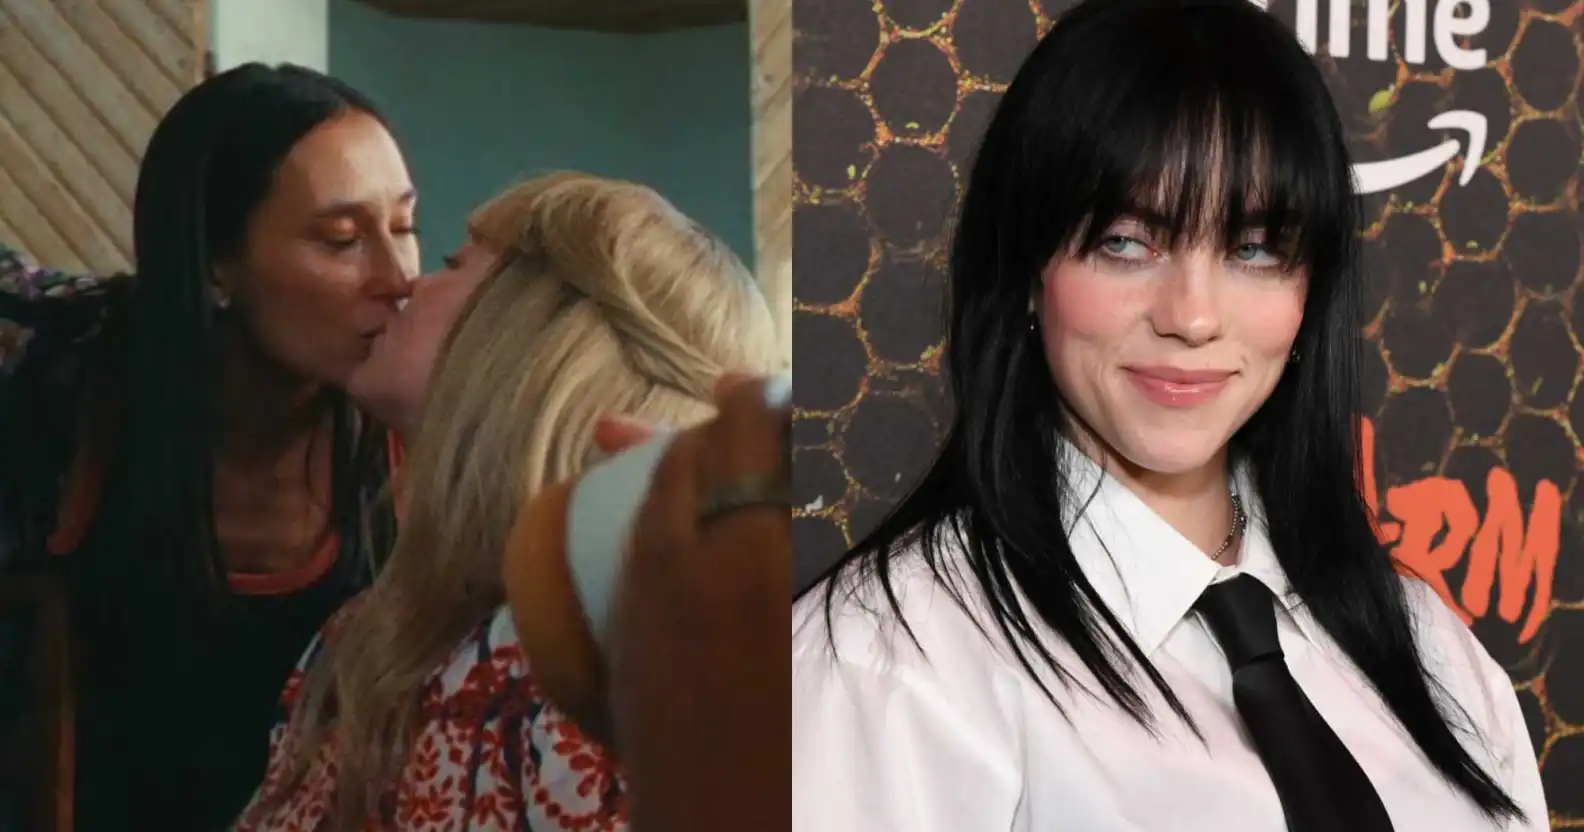 Two photos: Billie with blonde hair, kissing a woman at a dinner table, and Billie with dark hair wearing a white shirt and black tie smiling